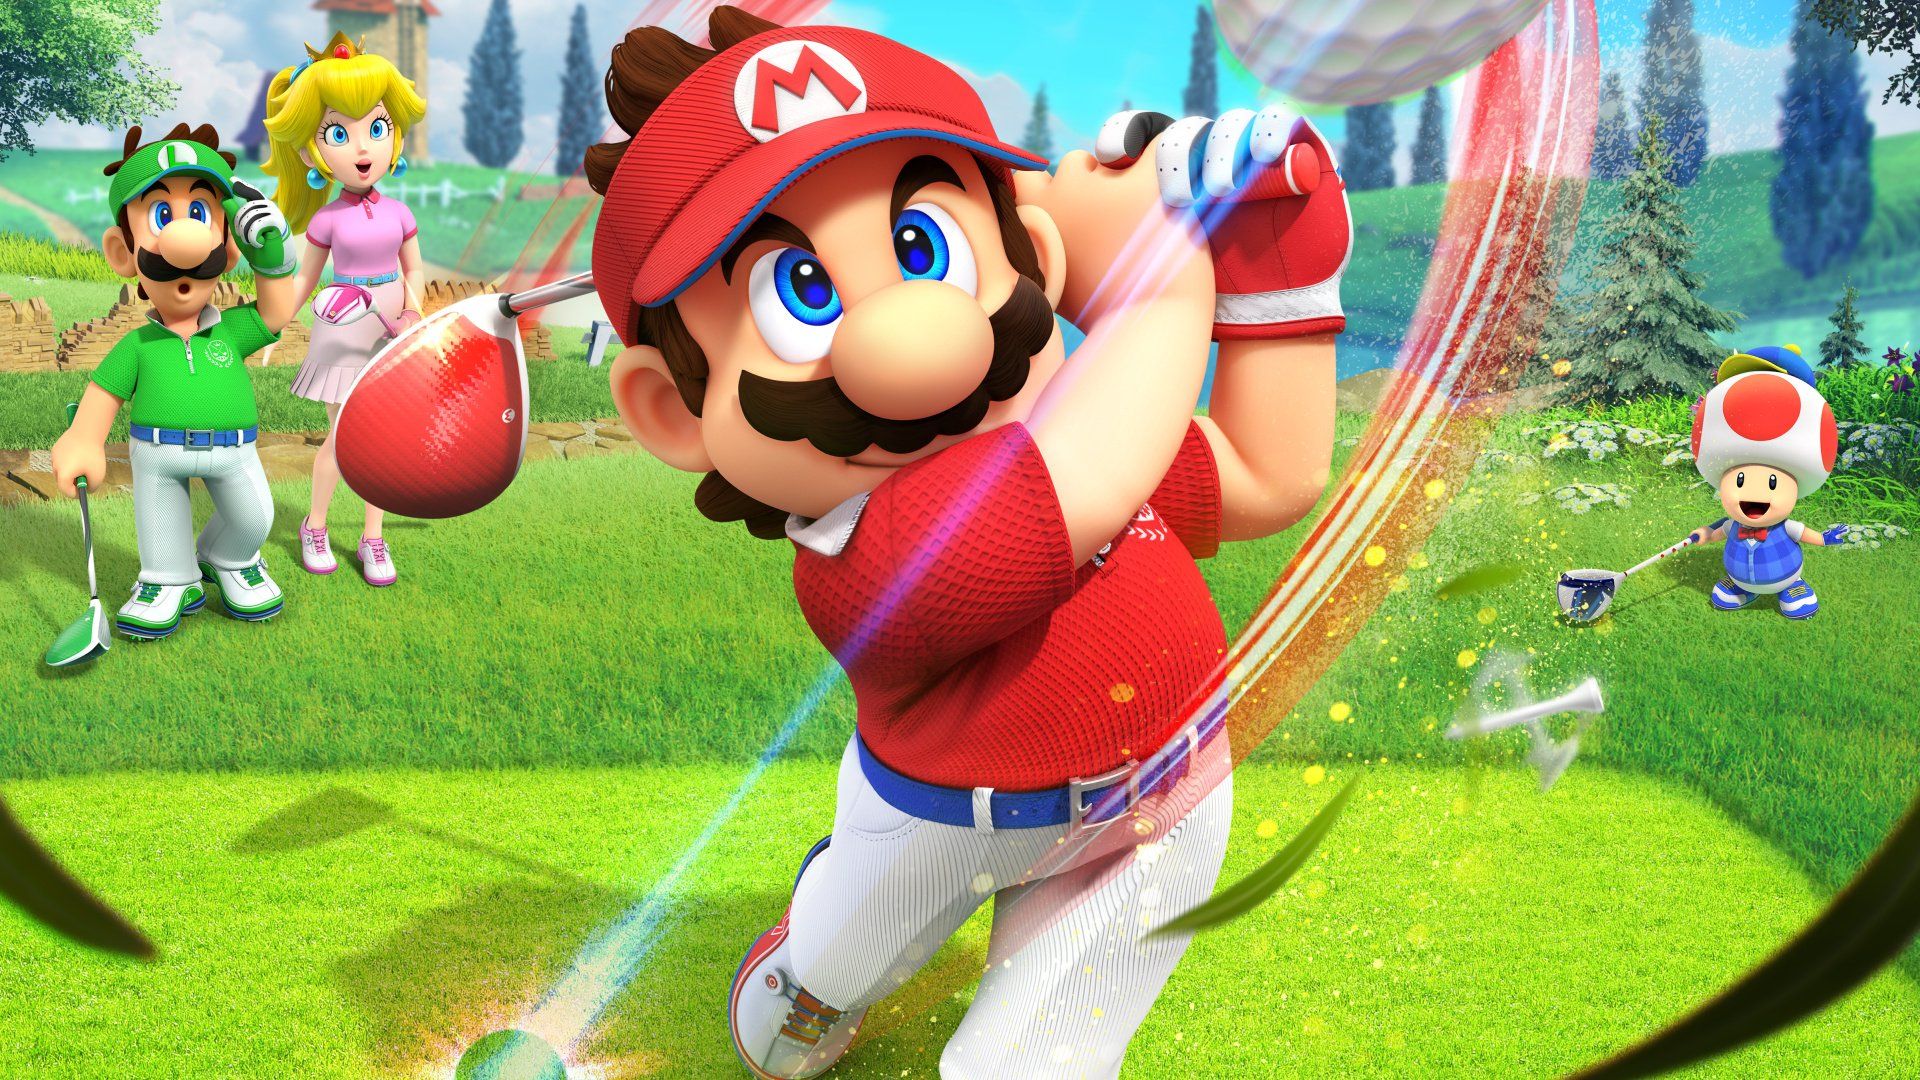 Mario Golf: Super Rush – A Complete Disappointment